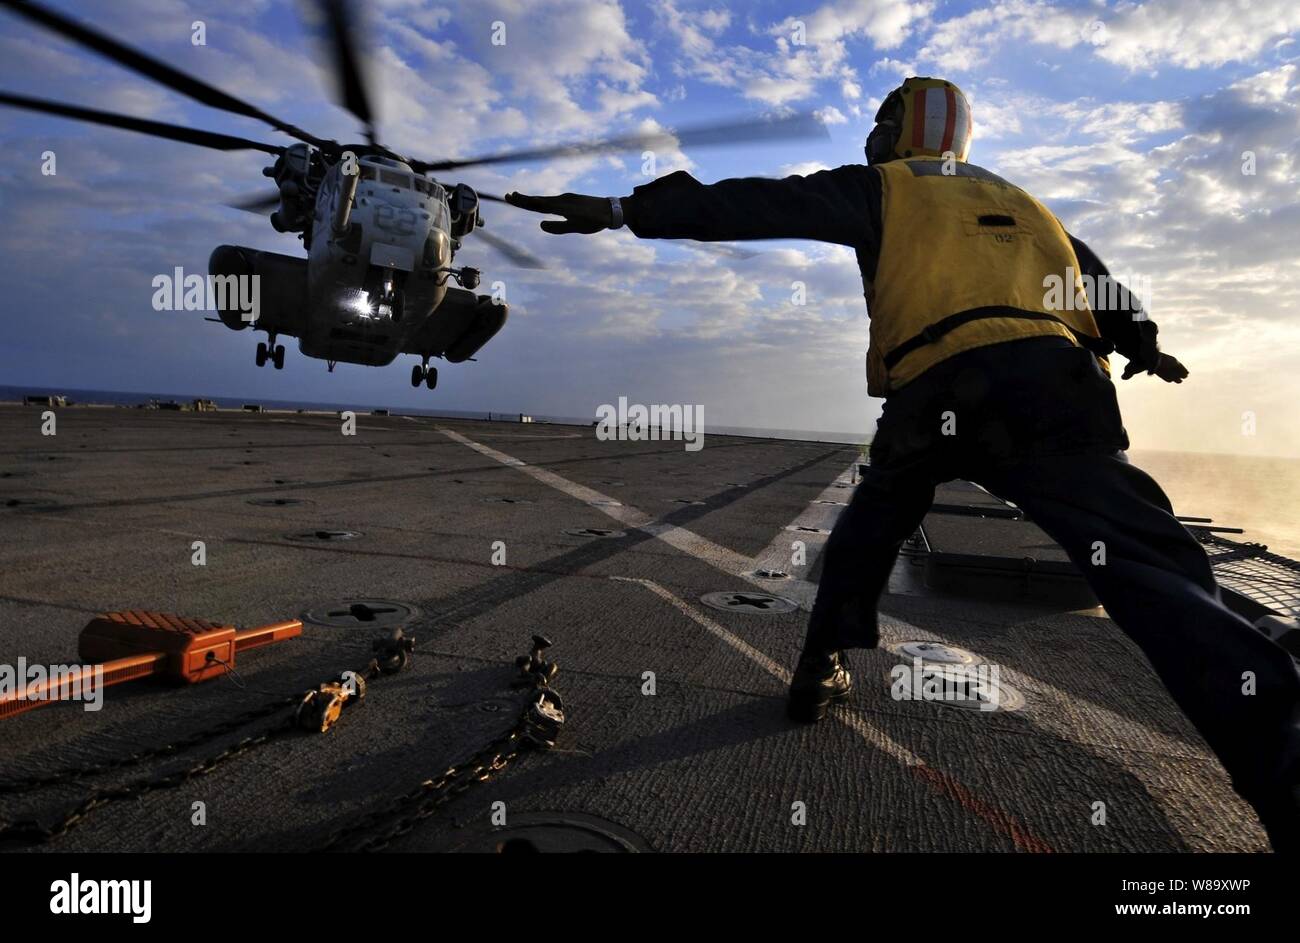 U.S. Navy Petty Officer 3rd Class Solomon Michel directs a U.S. Marine Corps CH-53E Sea Stallion helicopter as it approaches the flight deck of the amphibious dock landing ship USS Harpers Ferry (LSD 49) during touch-and-go landing qualifications in the South China Sea on Oct. 29, 2009.  The Harpers Ferry is part of the USS Denver (LPD 9) Amphibious Task Group, which is conducting fall patrol in the western Pacific Ocean with the embarked 31st Marine Expeditionary Unit. Stock Photo